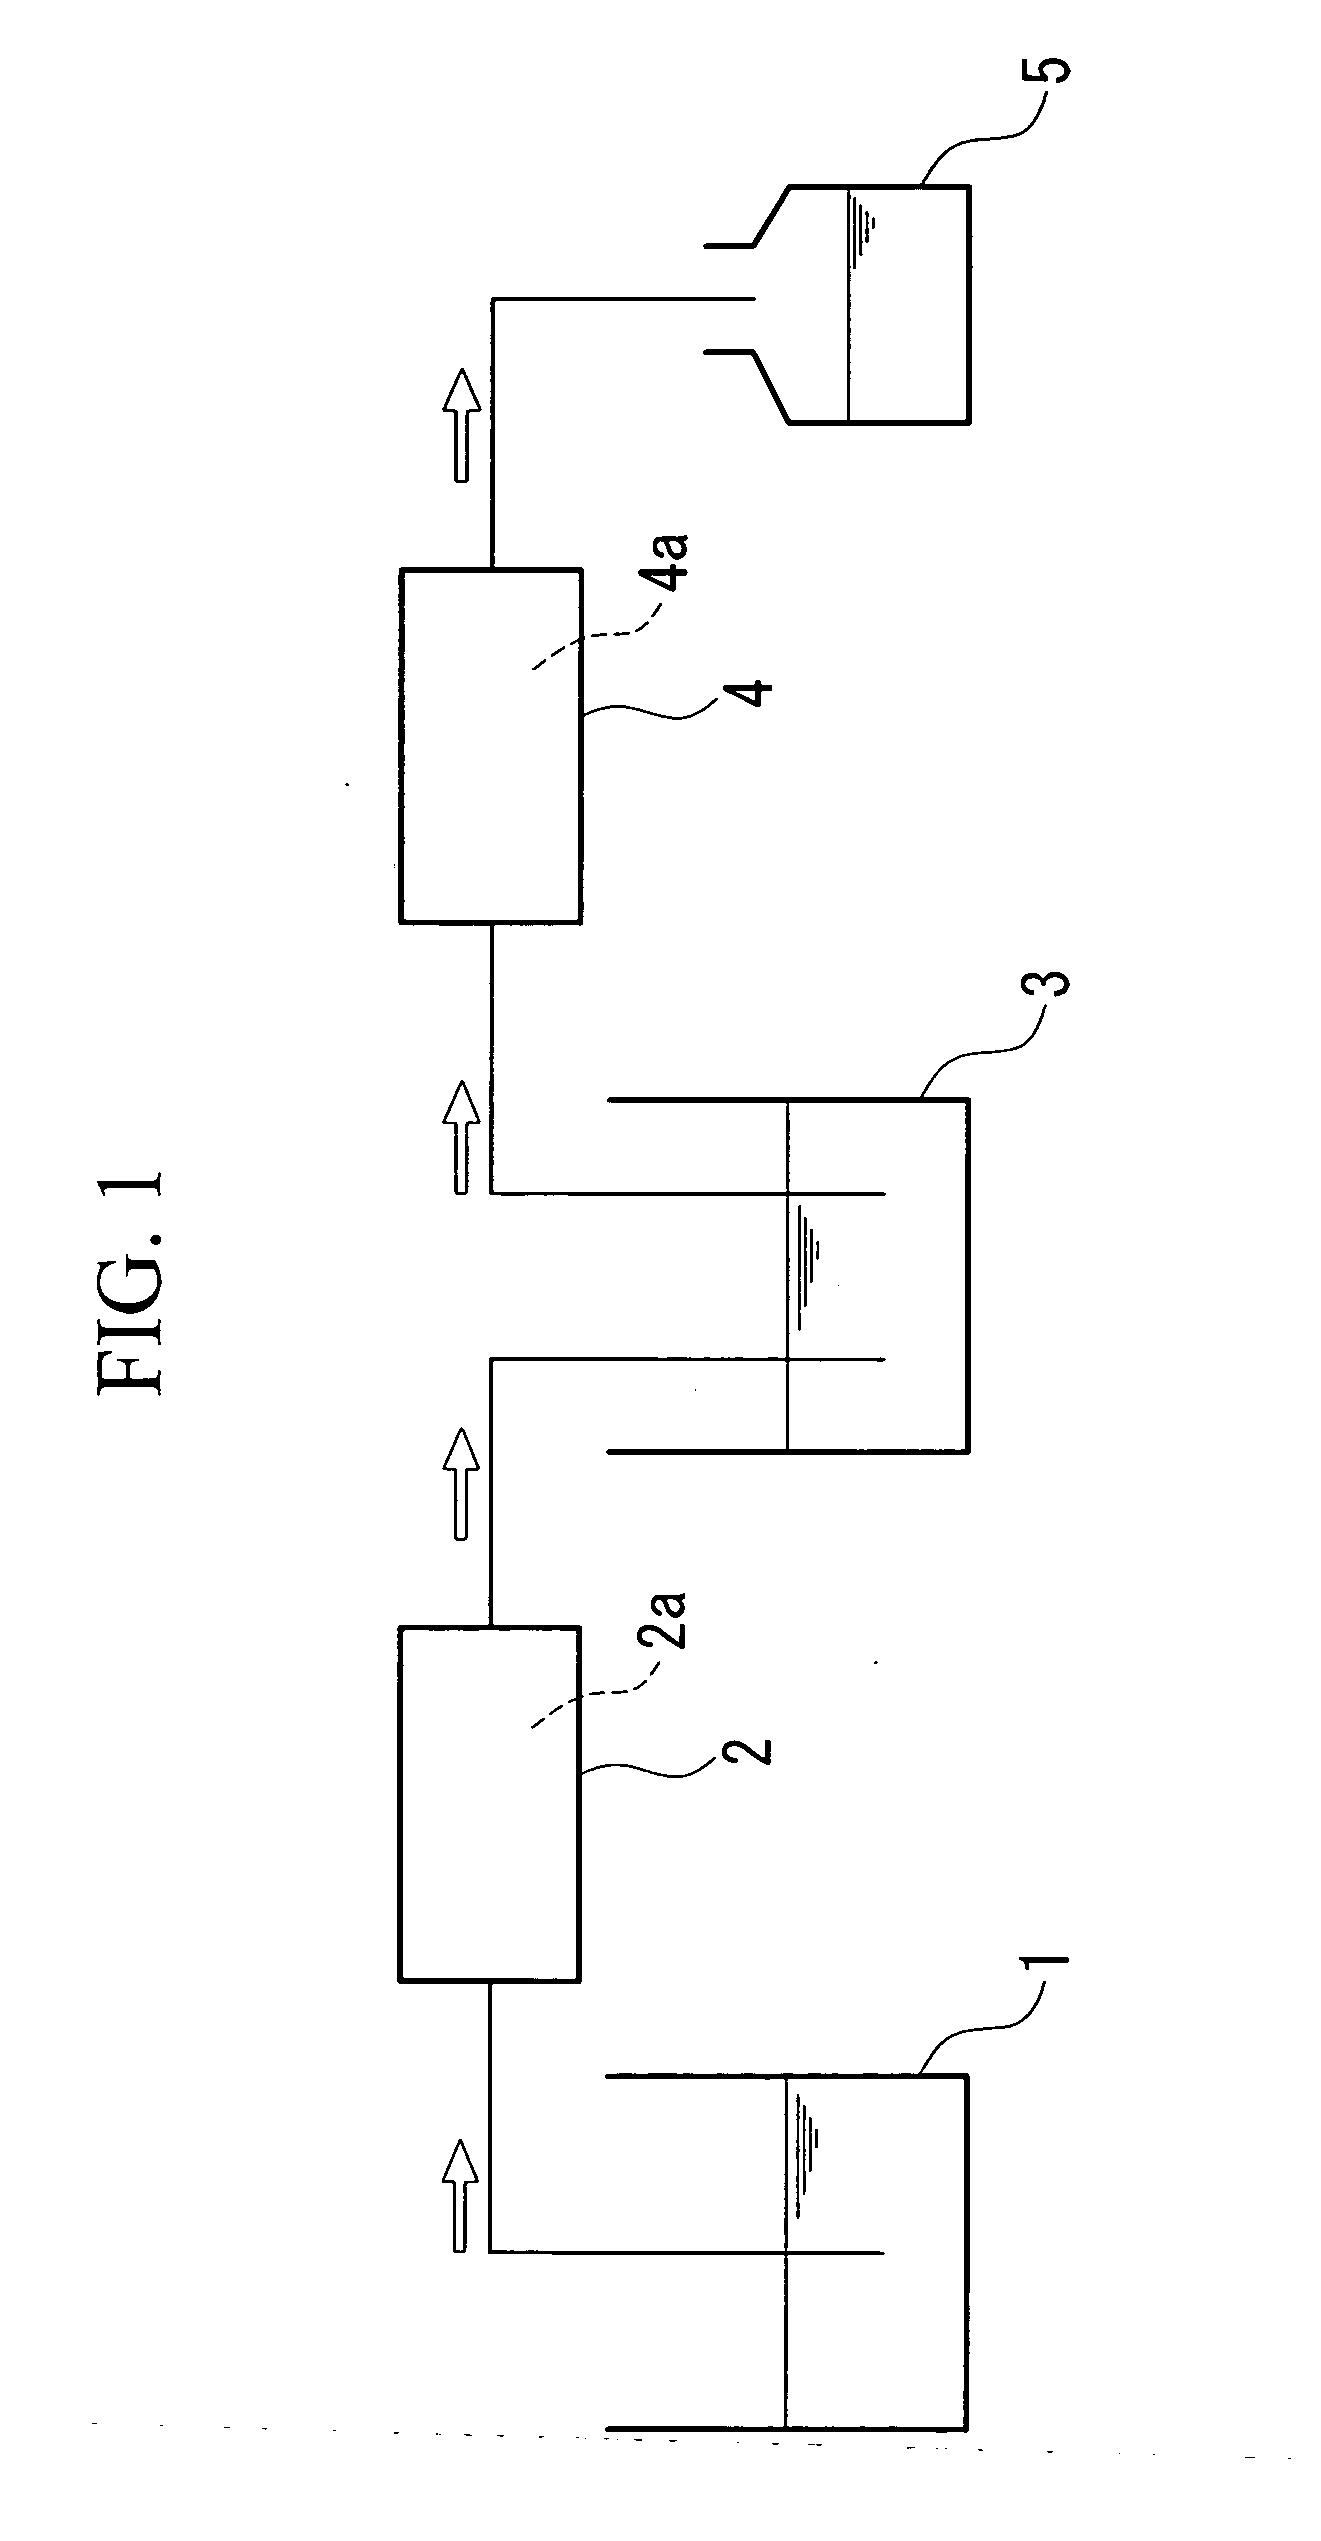 Process for producing photoresist composition, filtration device, application device, and photoresist composition